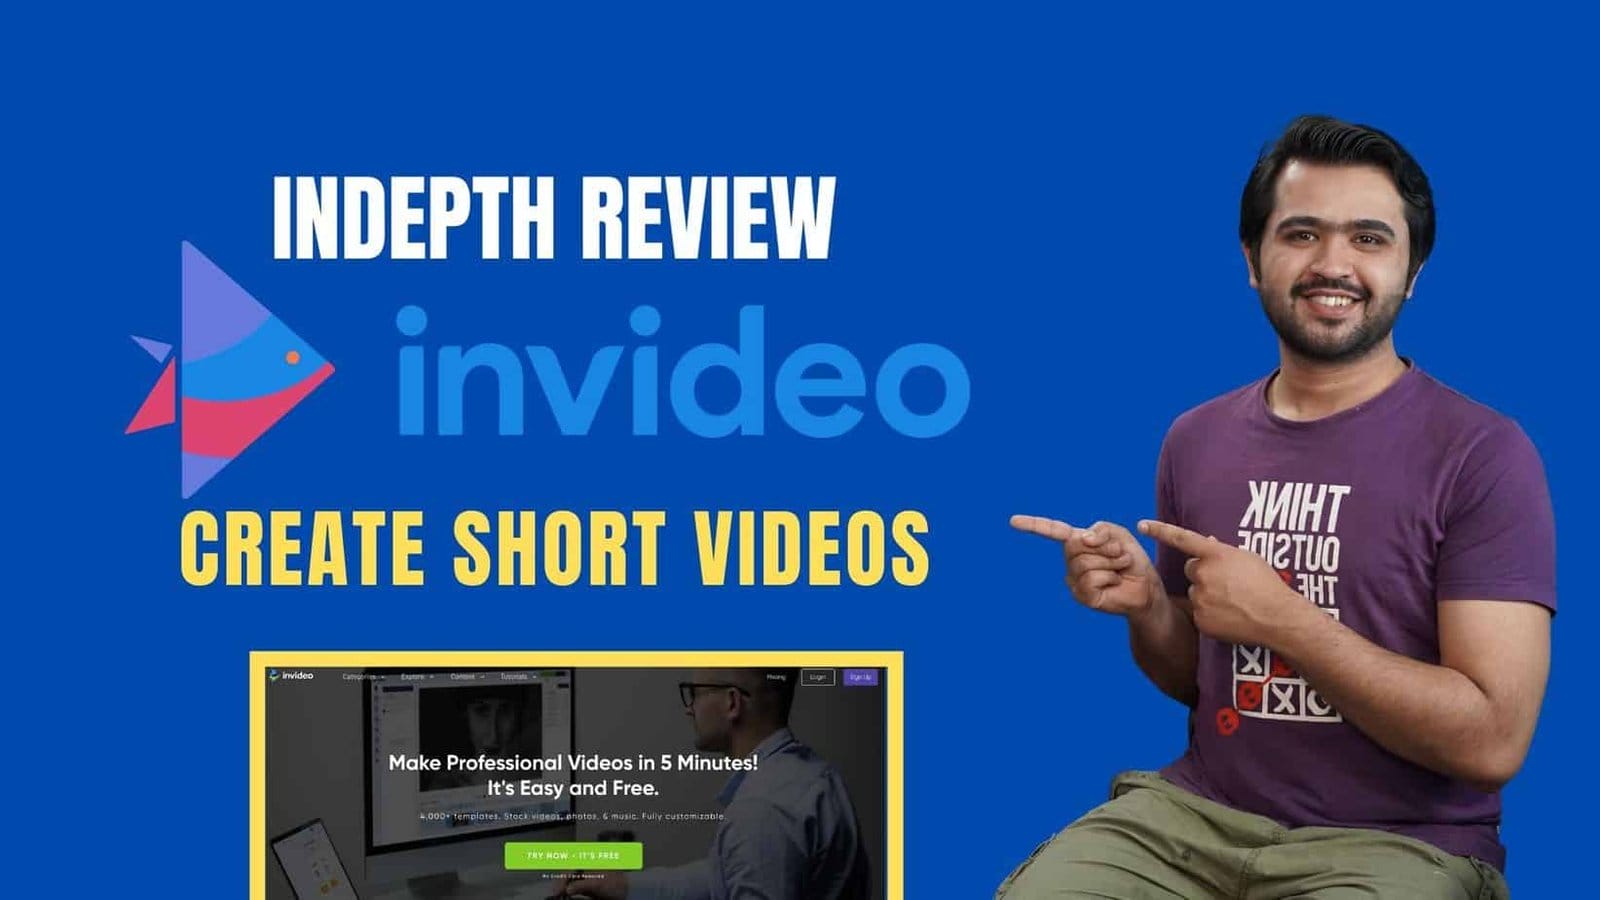 INVIDEO INDEPTH REVIEW